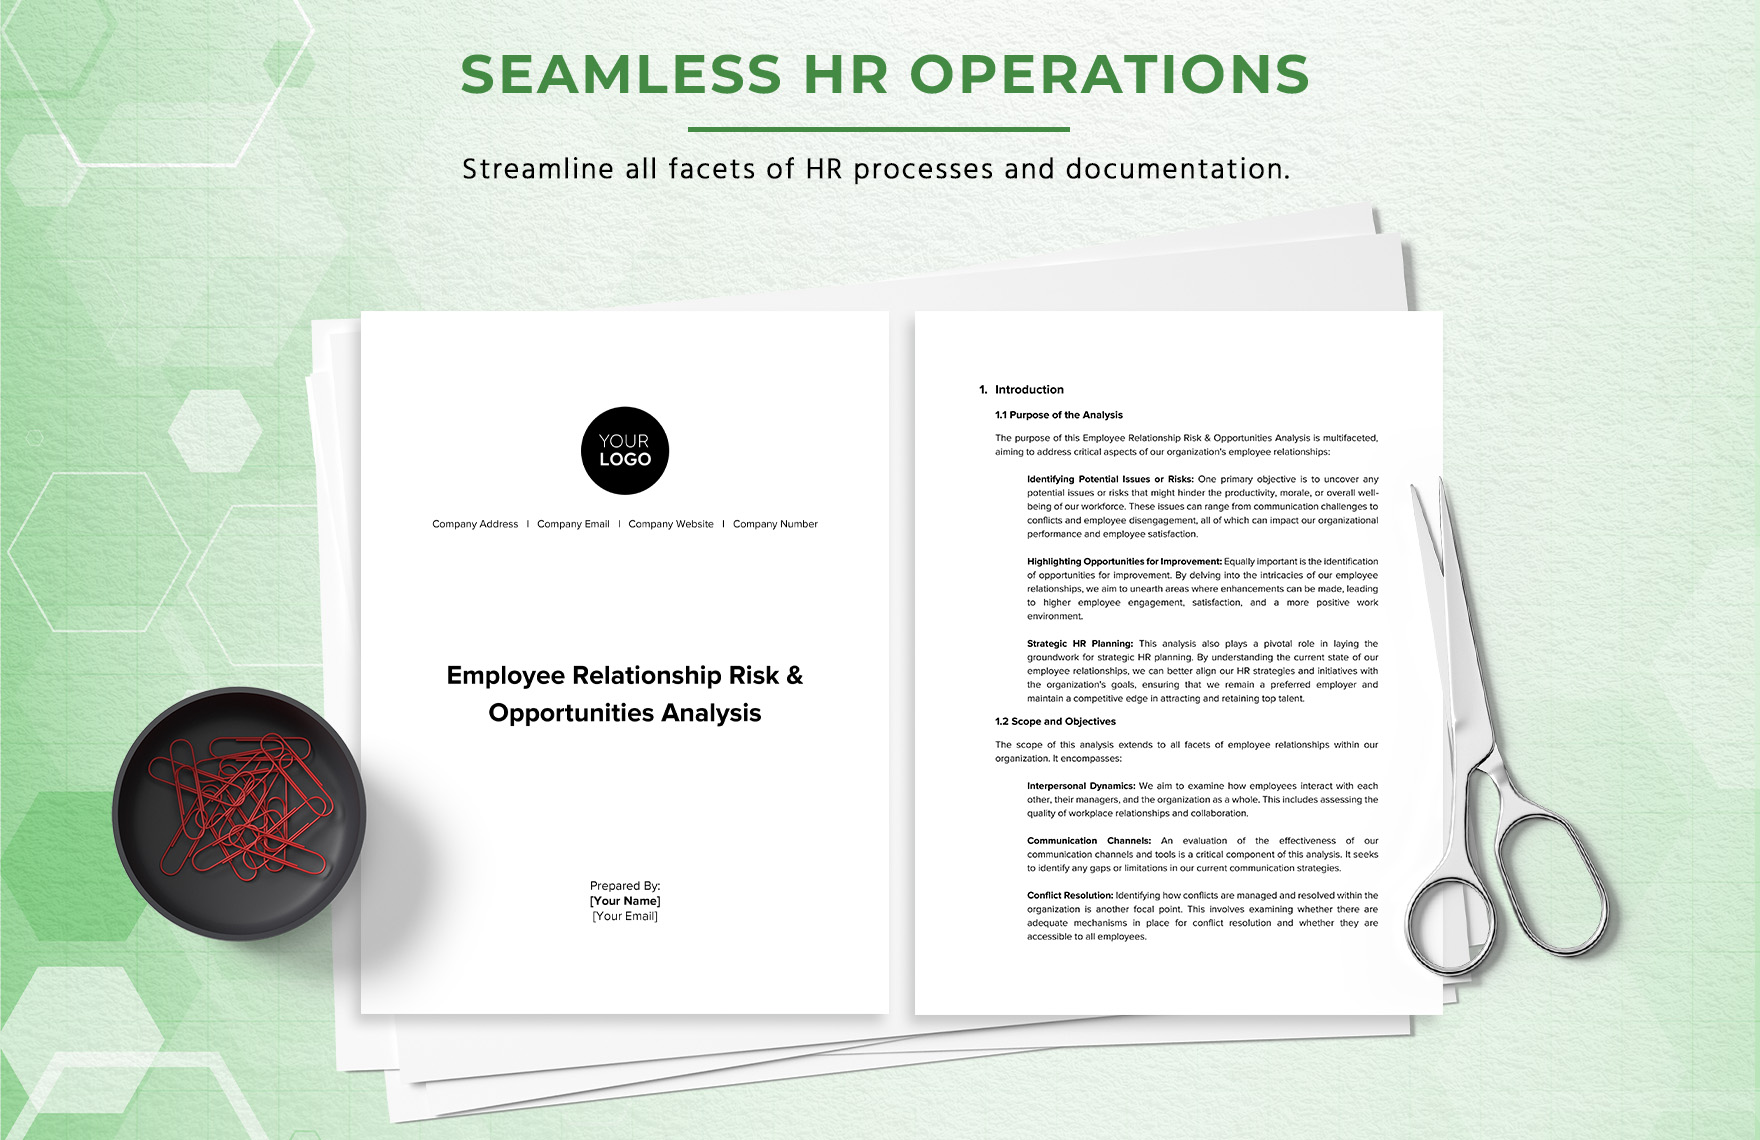 Employee Relationship Risk & Opportunities Analysis HR Template